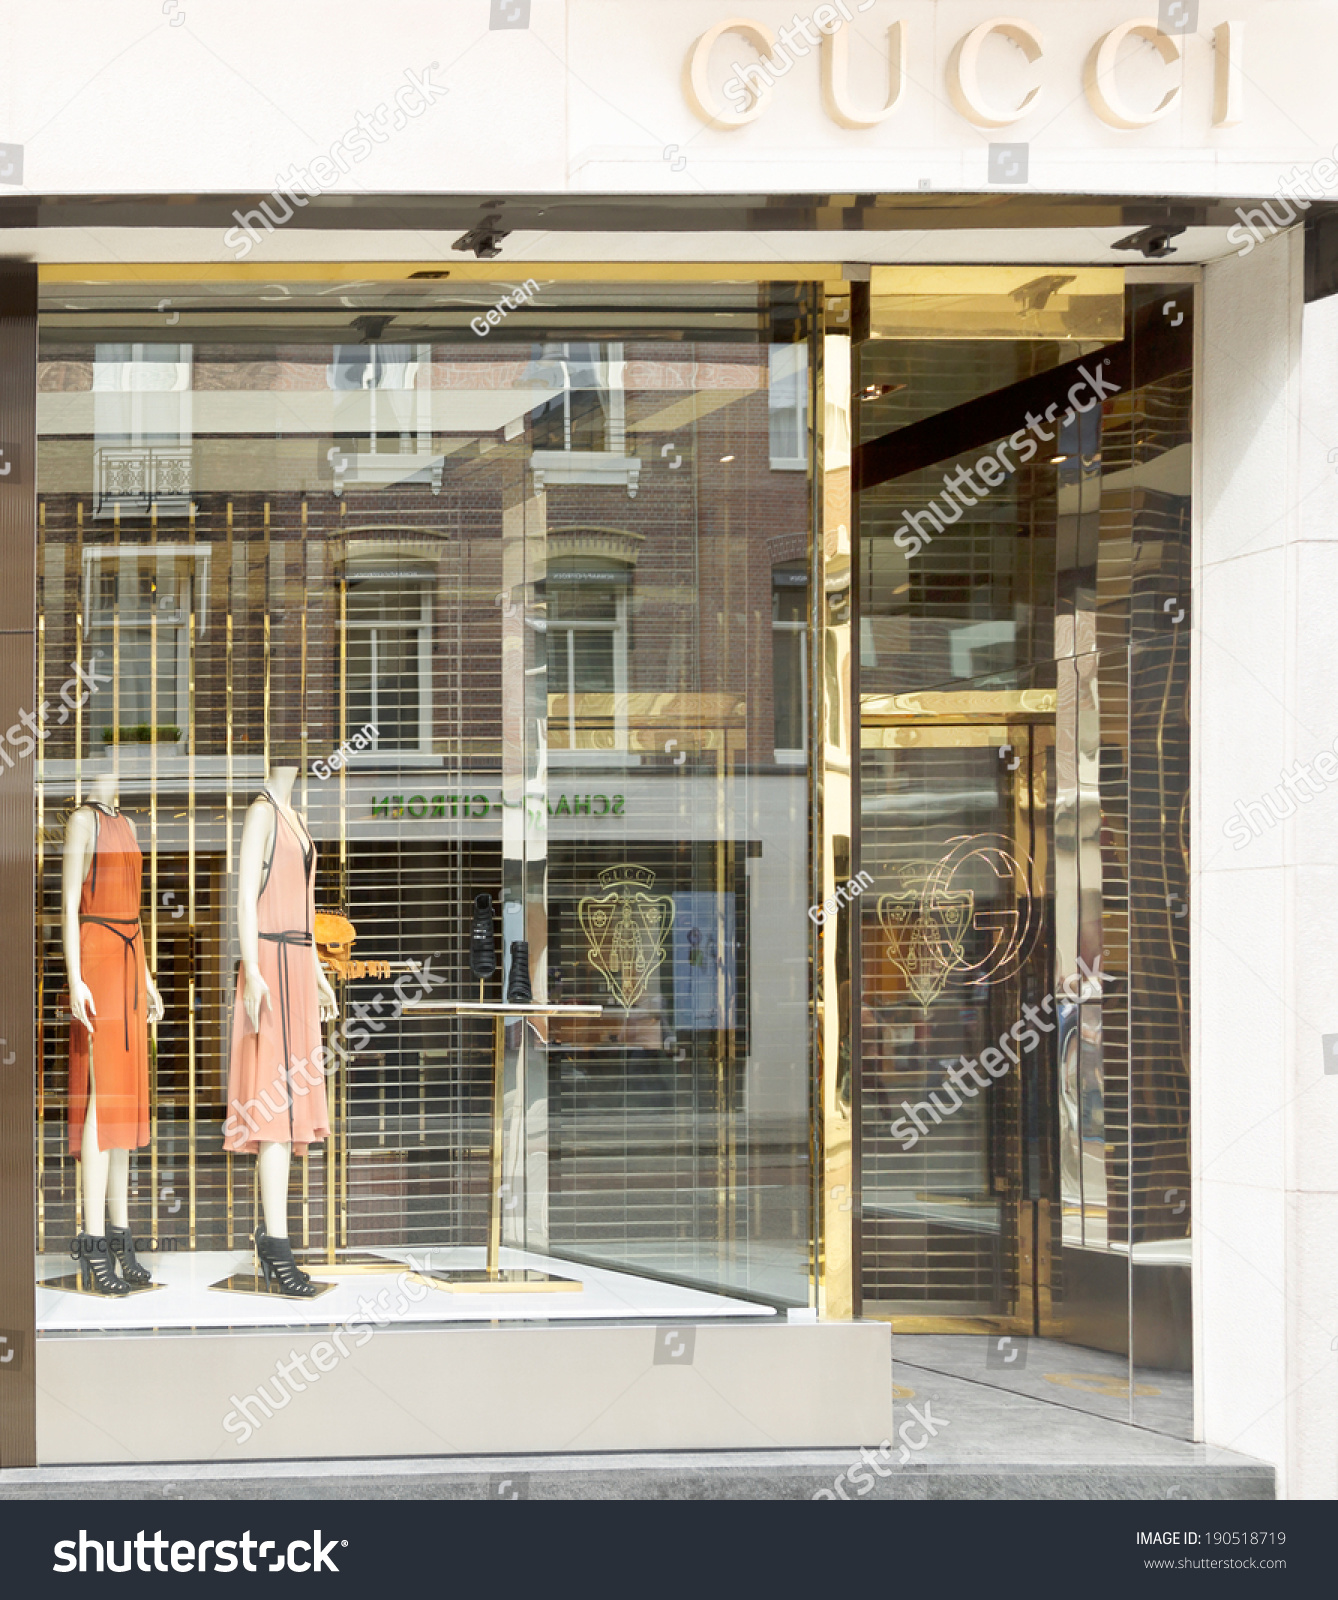 Amsterdam, The Netherlands - April 26, 2014: Gucci Store In The P.C.Hooftstraat, Shopping Street ...